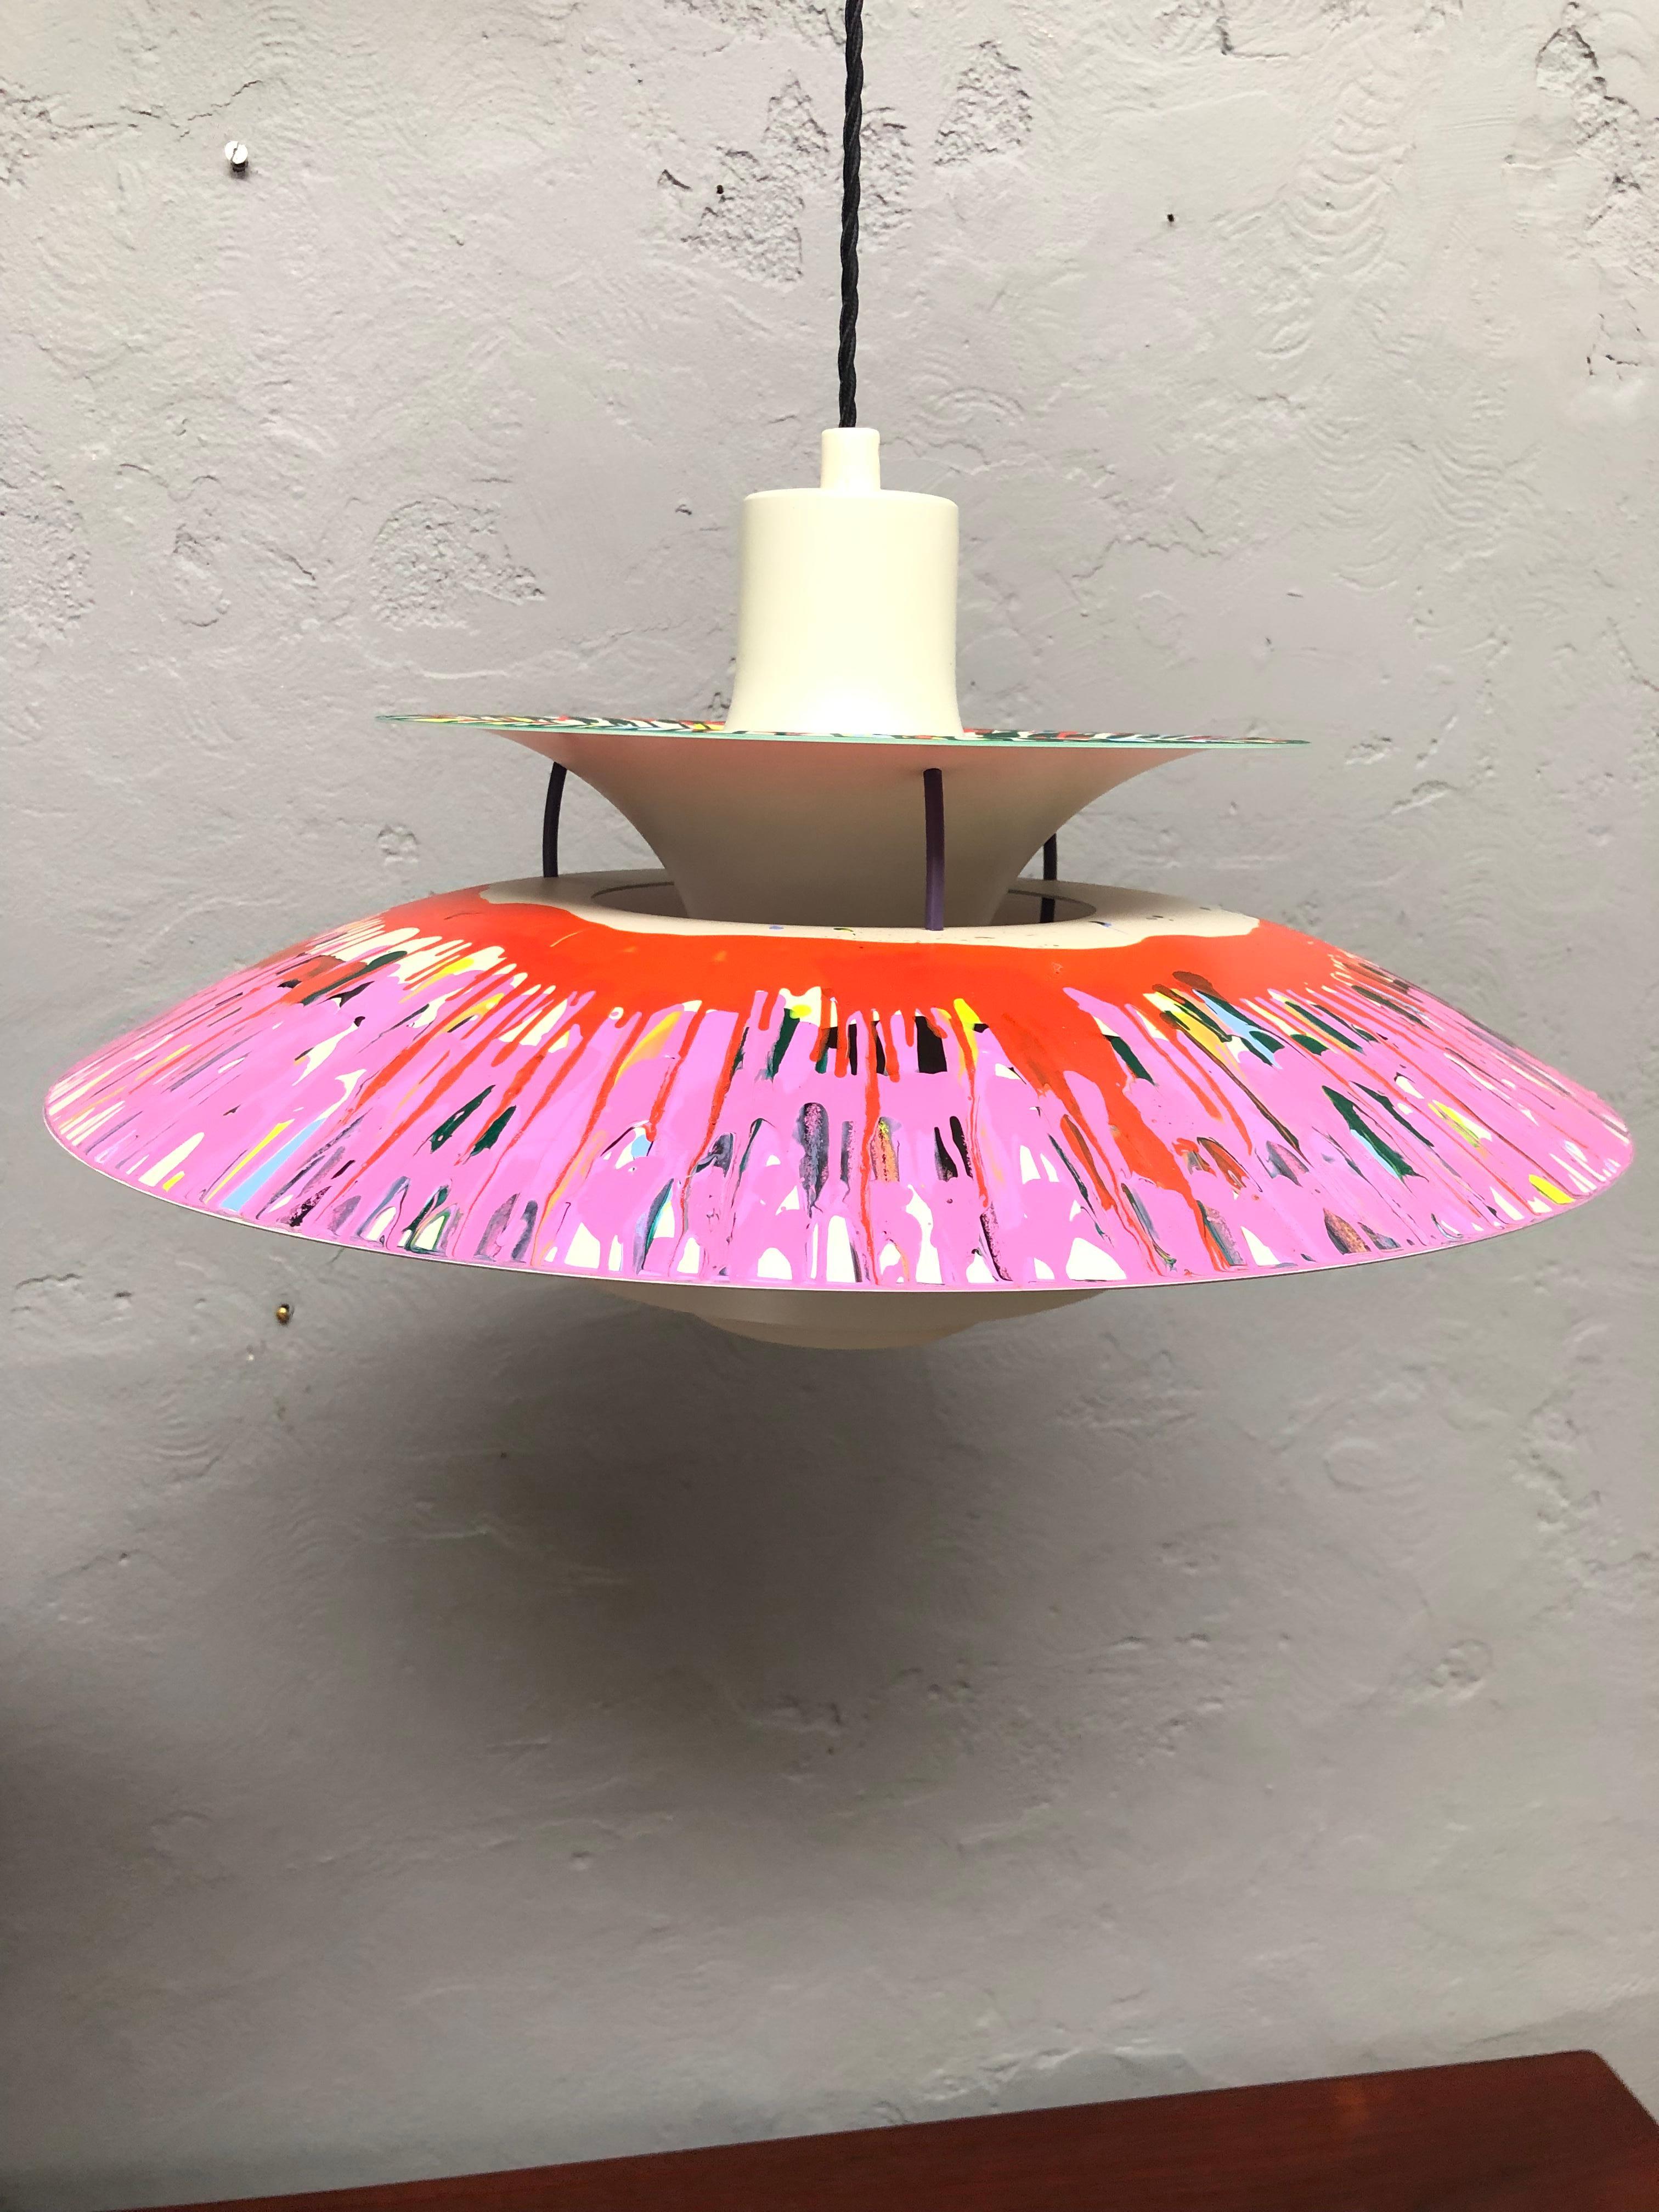 Iconic Vintage PH5 chandelier by Poul Henningsen for Louis Poulsen of Denmark from the 1990s with abstract art work by G61.
Titled “Cherry Blossom” 
The art work is acrylic paint with a clear coat finish on top. 
All types of abstract art share a